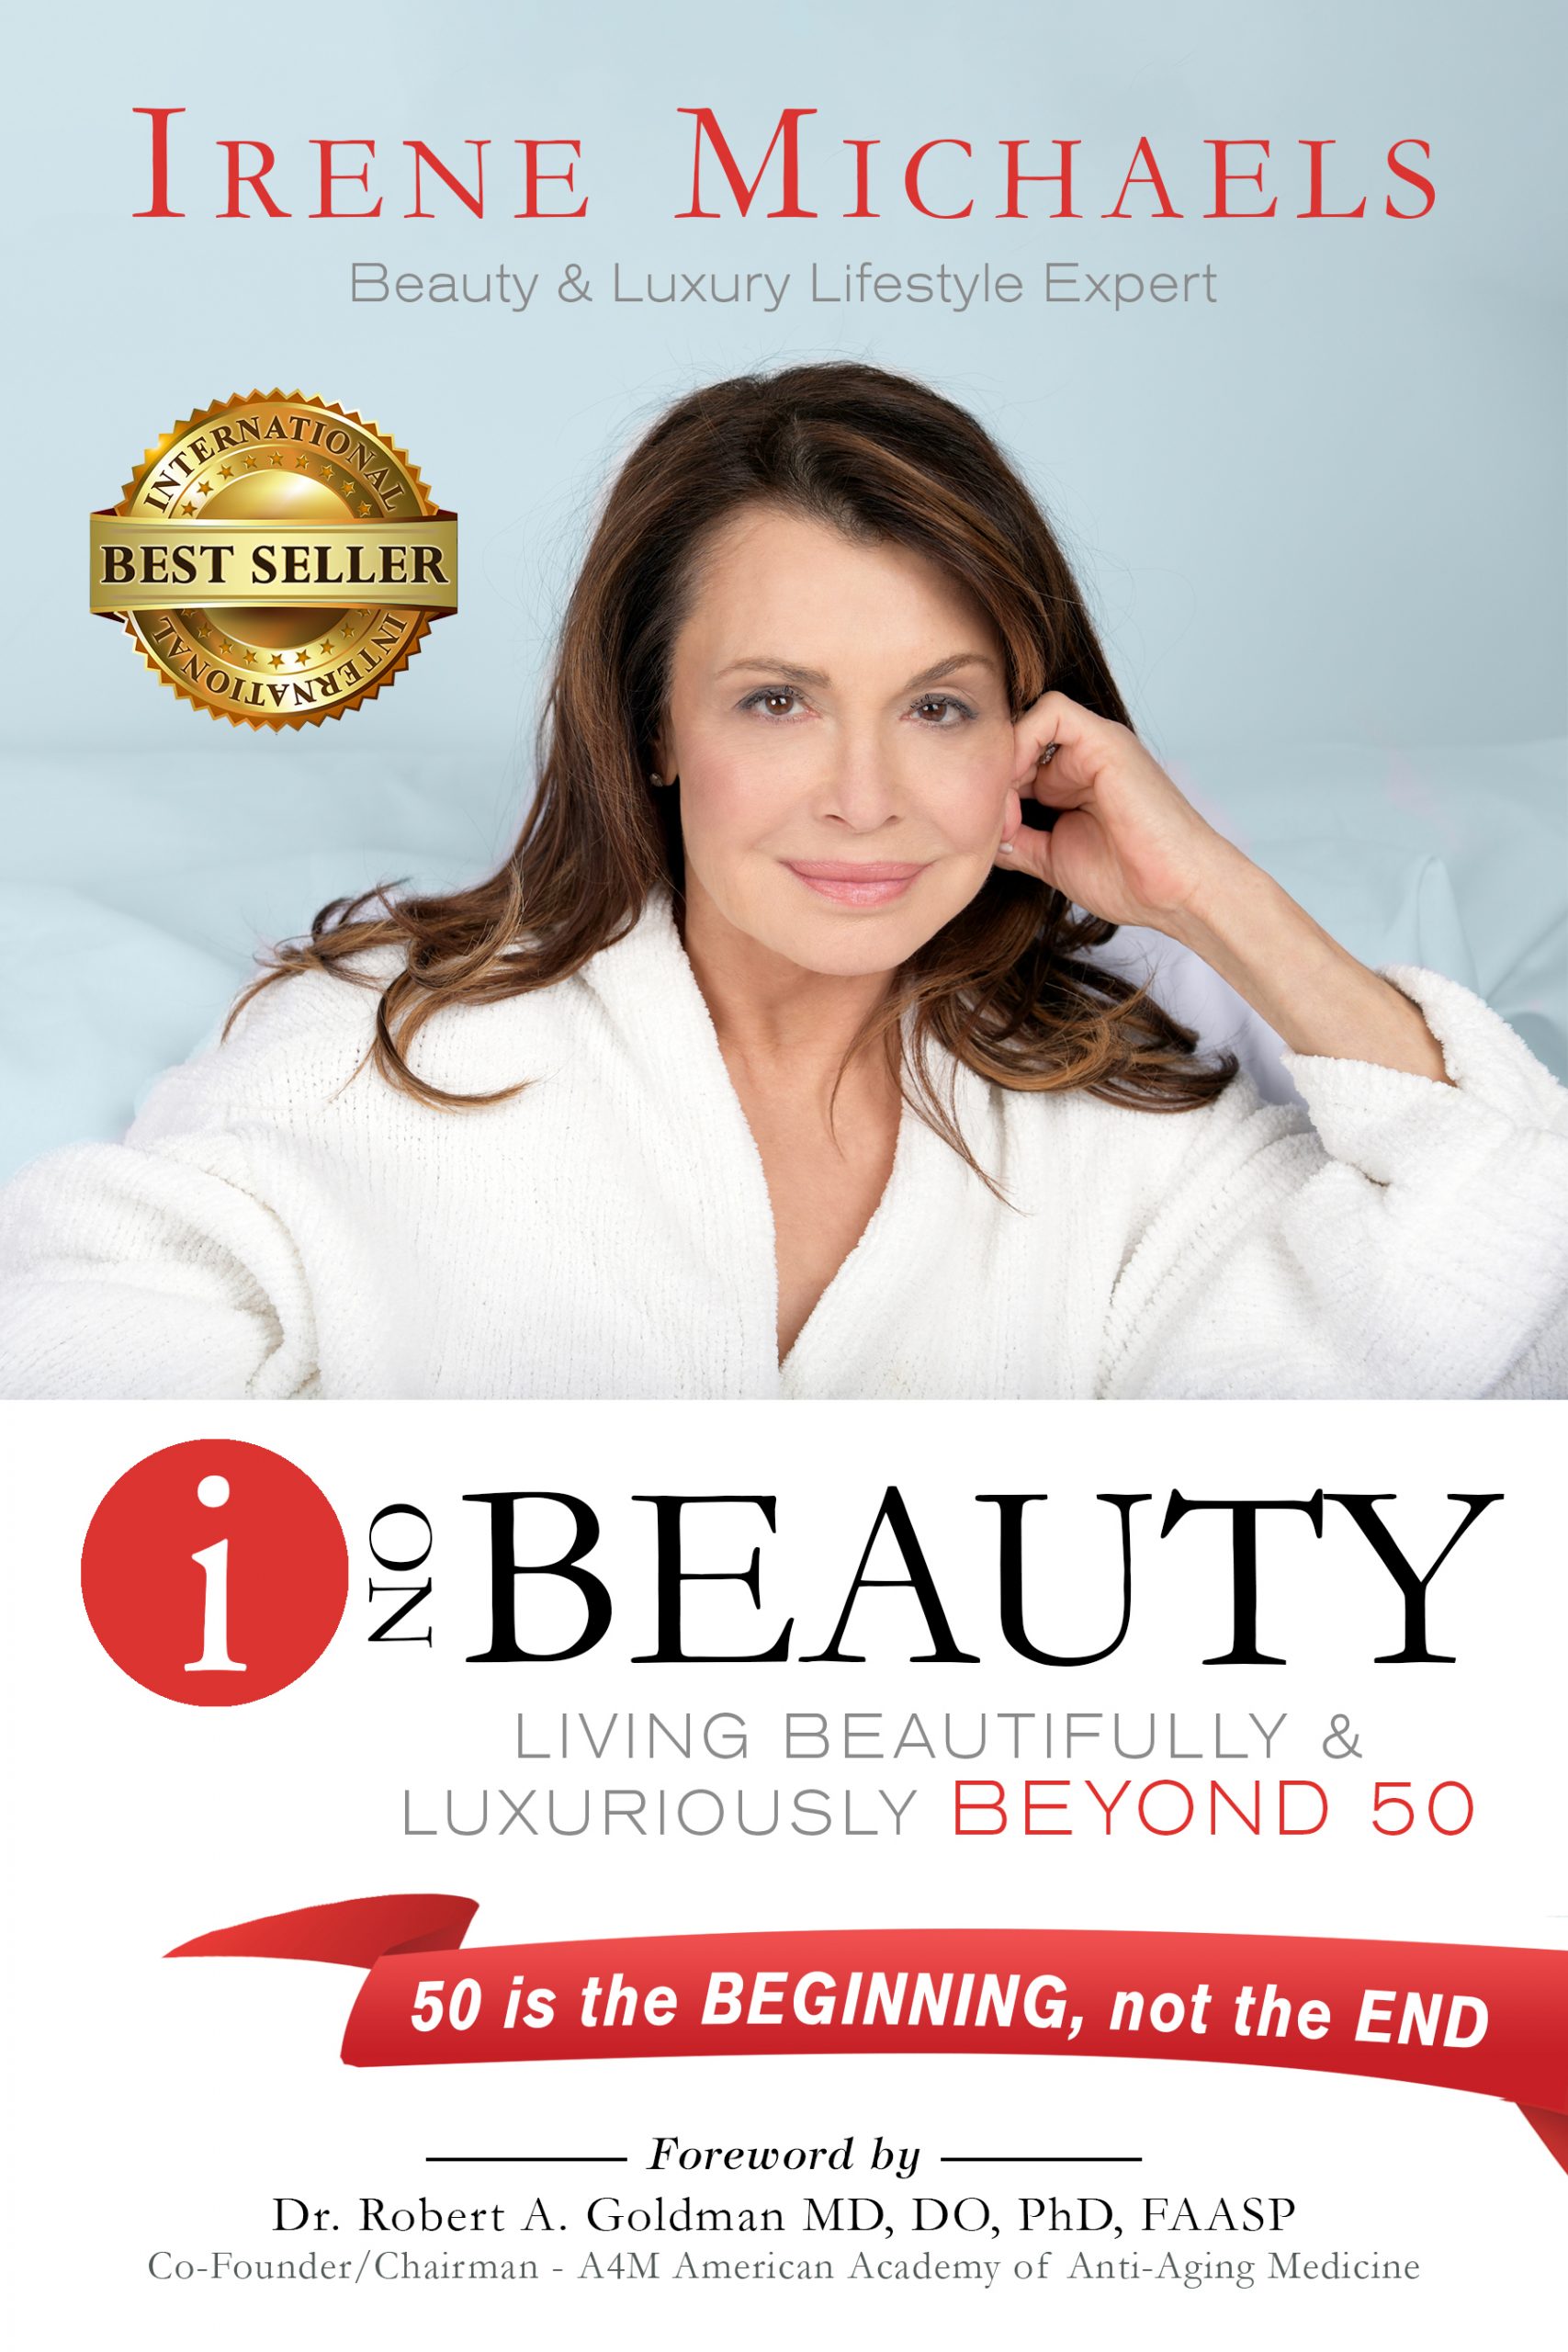 Cyber Monday - “I On Beauty: Living Beautifully and Luxuriously Beyond 50” By Irene Michaels